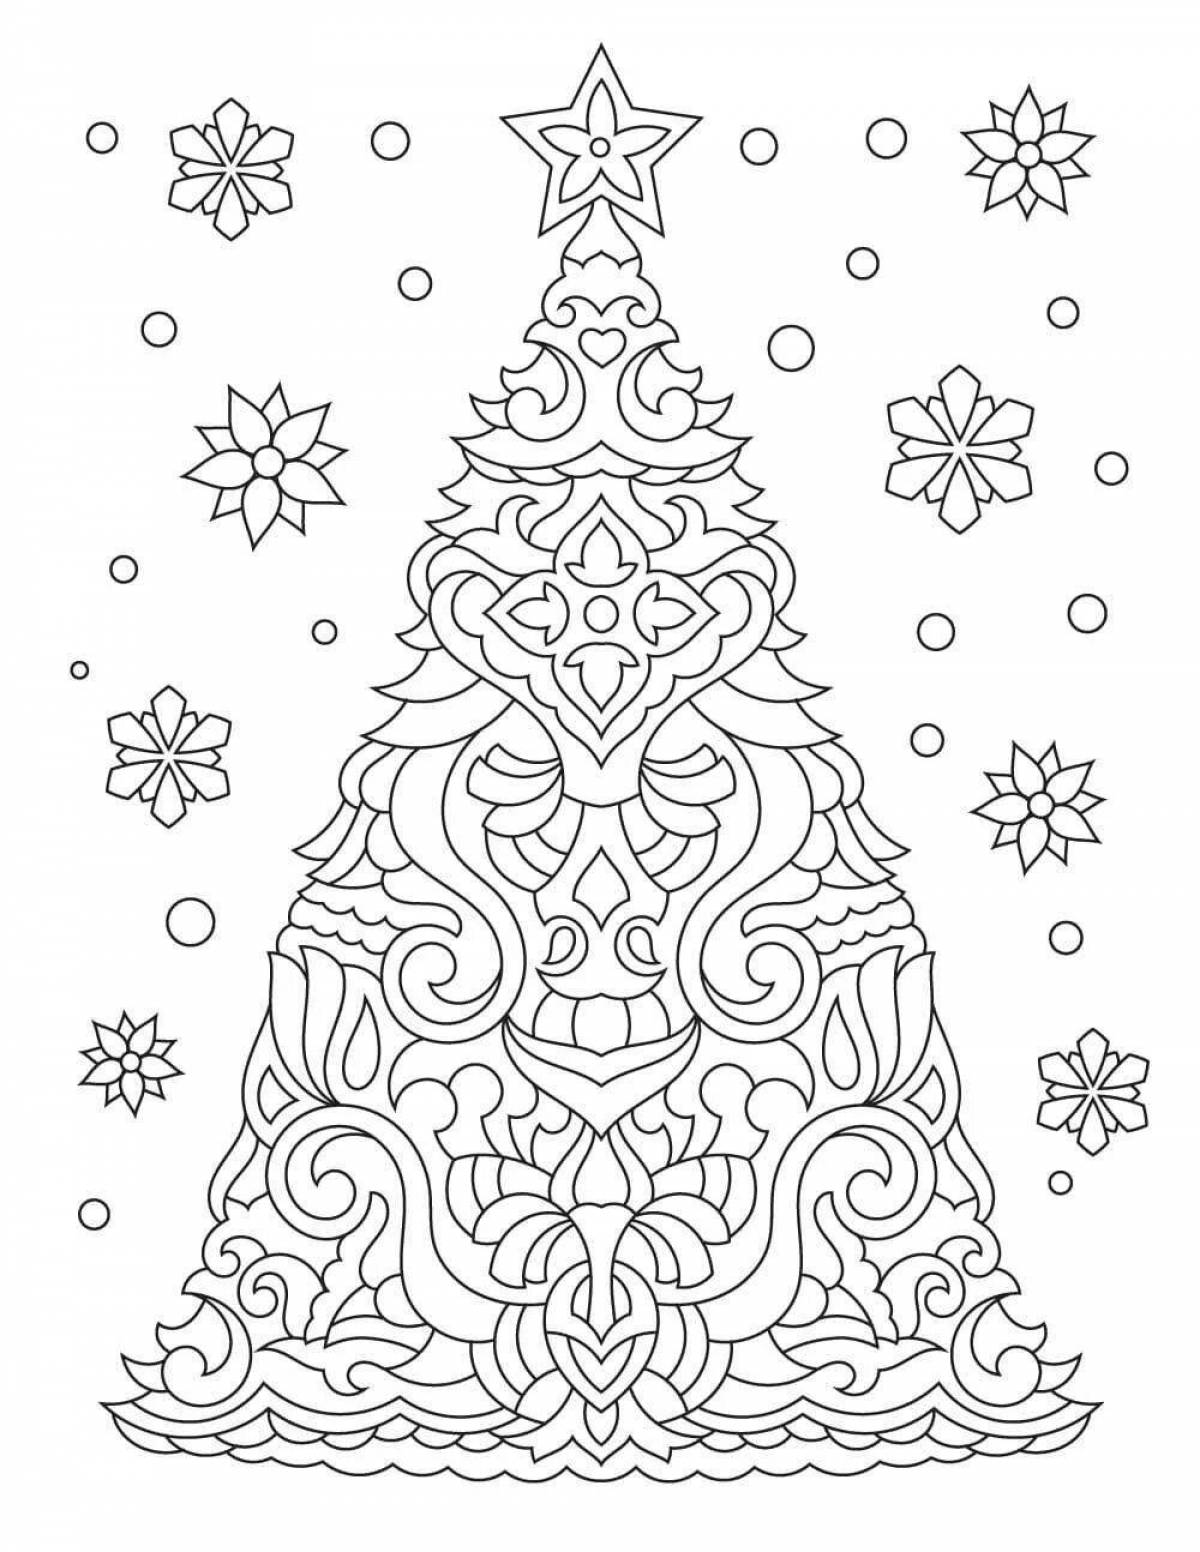 Whimsical Christmas coloring book for teens